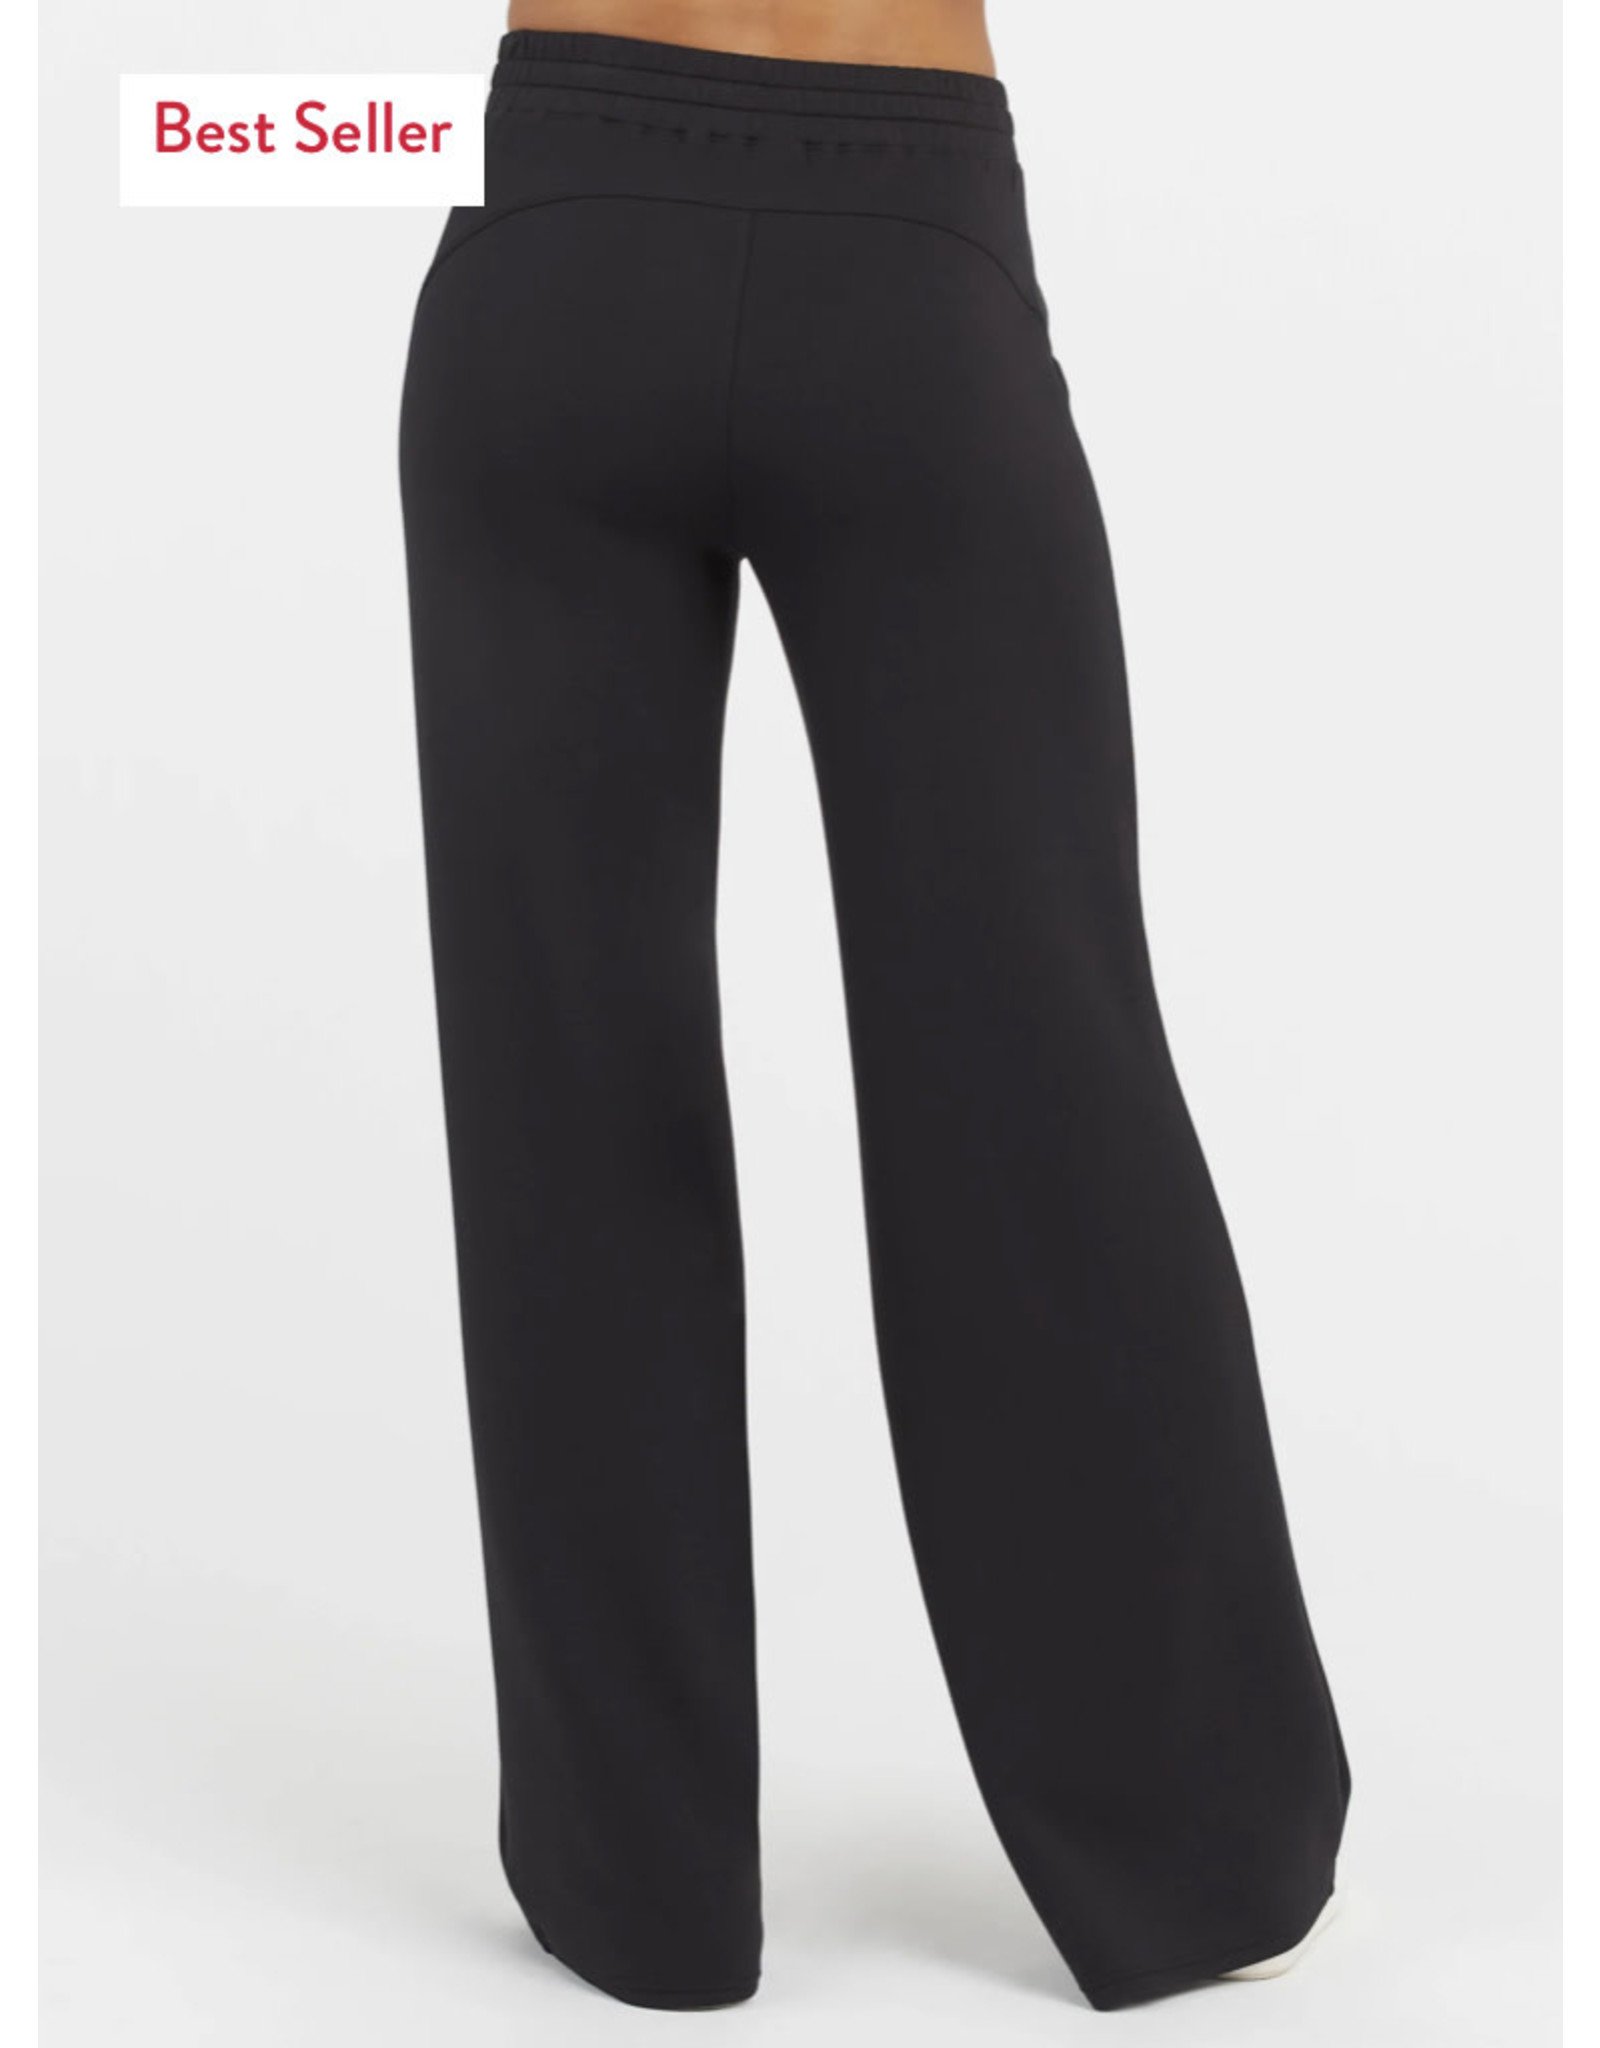 Spanx Air Essentials Tapered Pant in Black